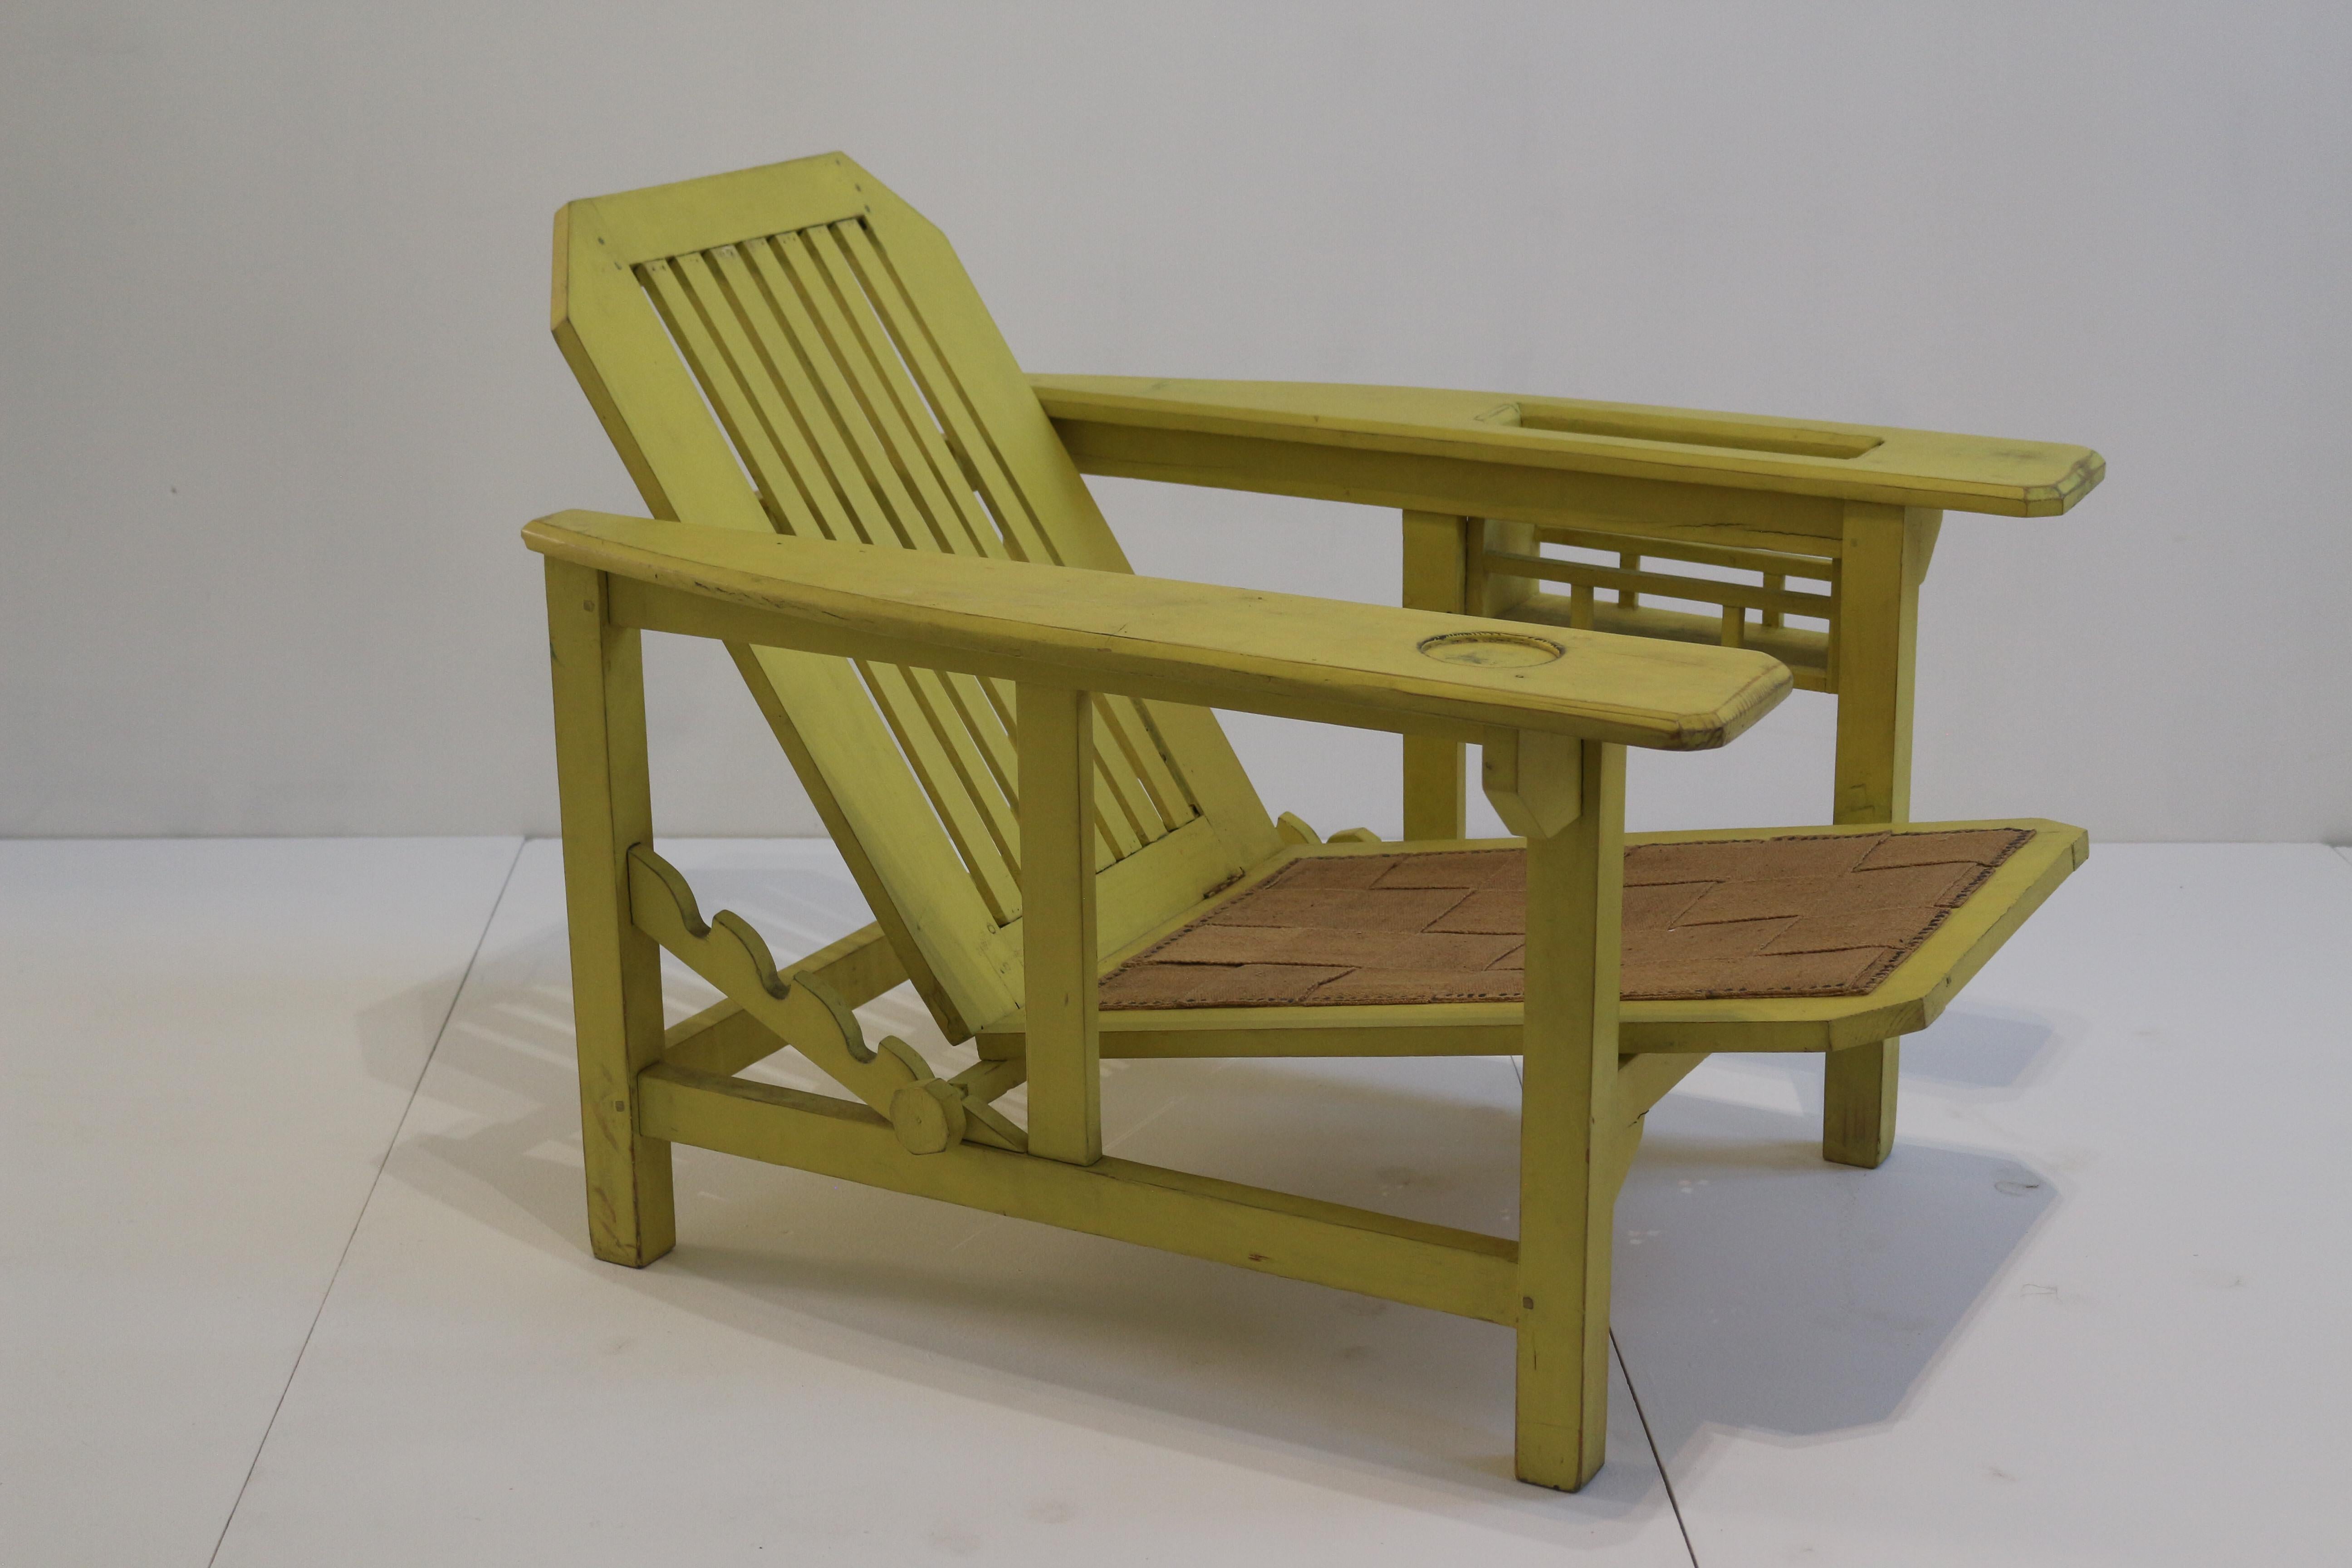 Foldable garden furniture in green and cream white lacquered wood including a pair of armchairs

square structure in openwork yellow lacquered wood / rack system for tilting the backrest with wide armrests / Dariel stone slabs


Biography: